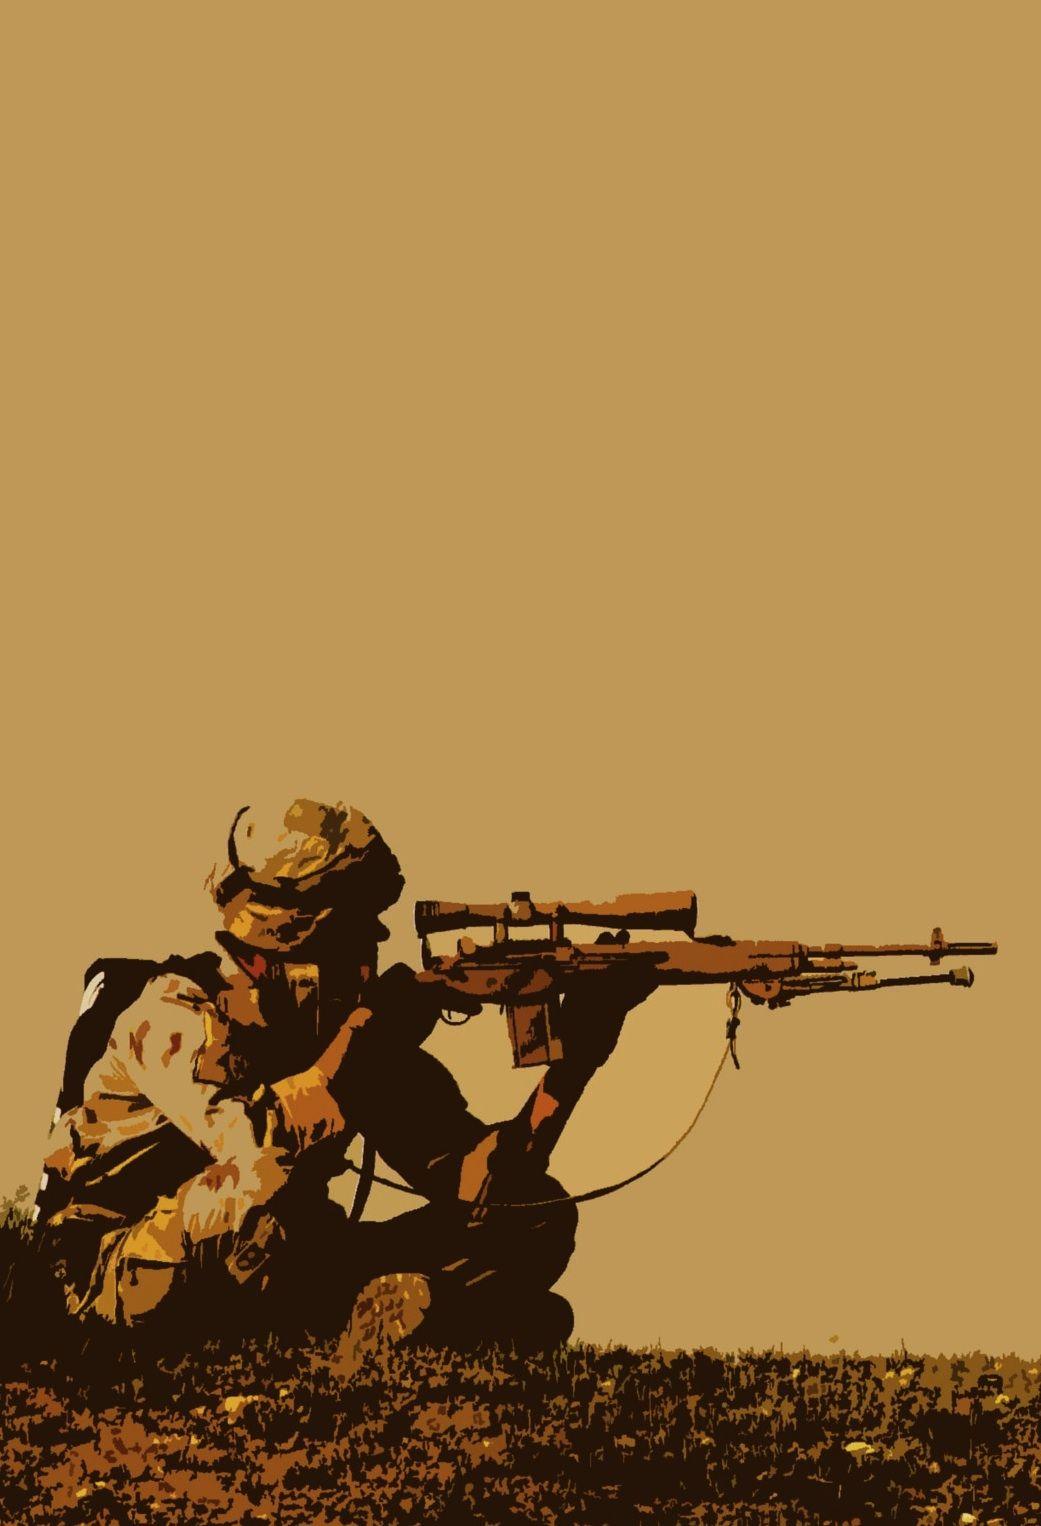 Army 929 camo military multicam us HD phone wallpaper  Peakpx